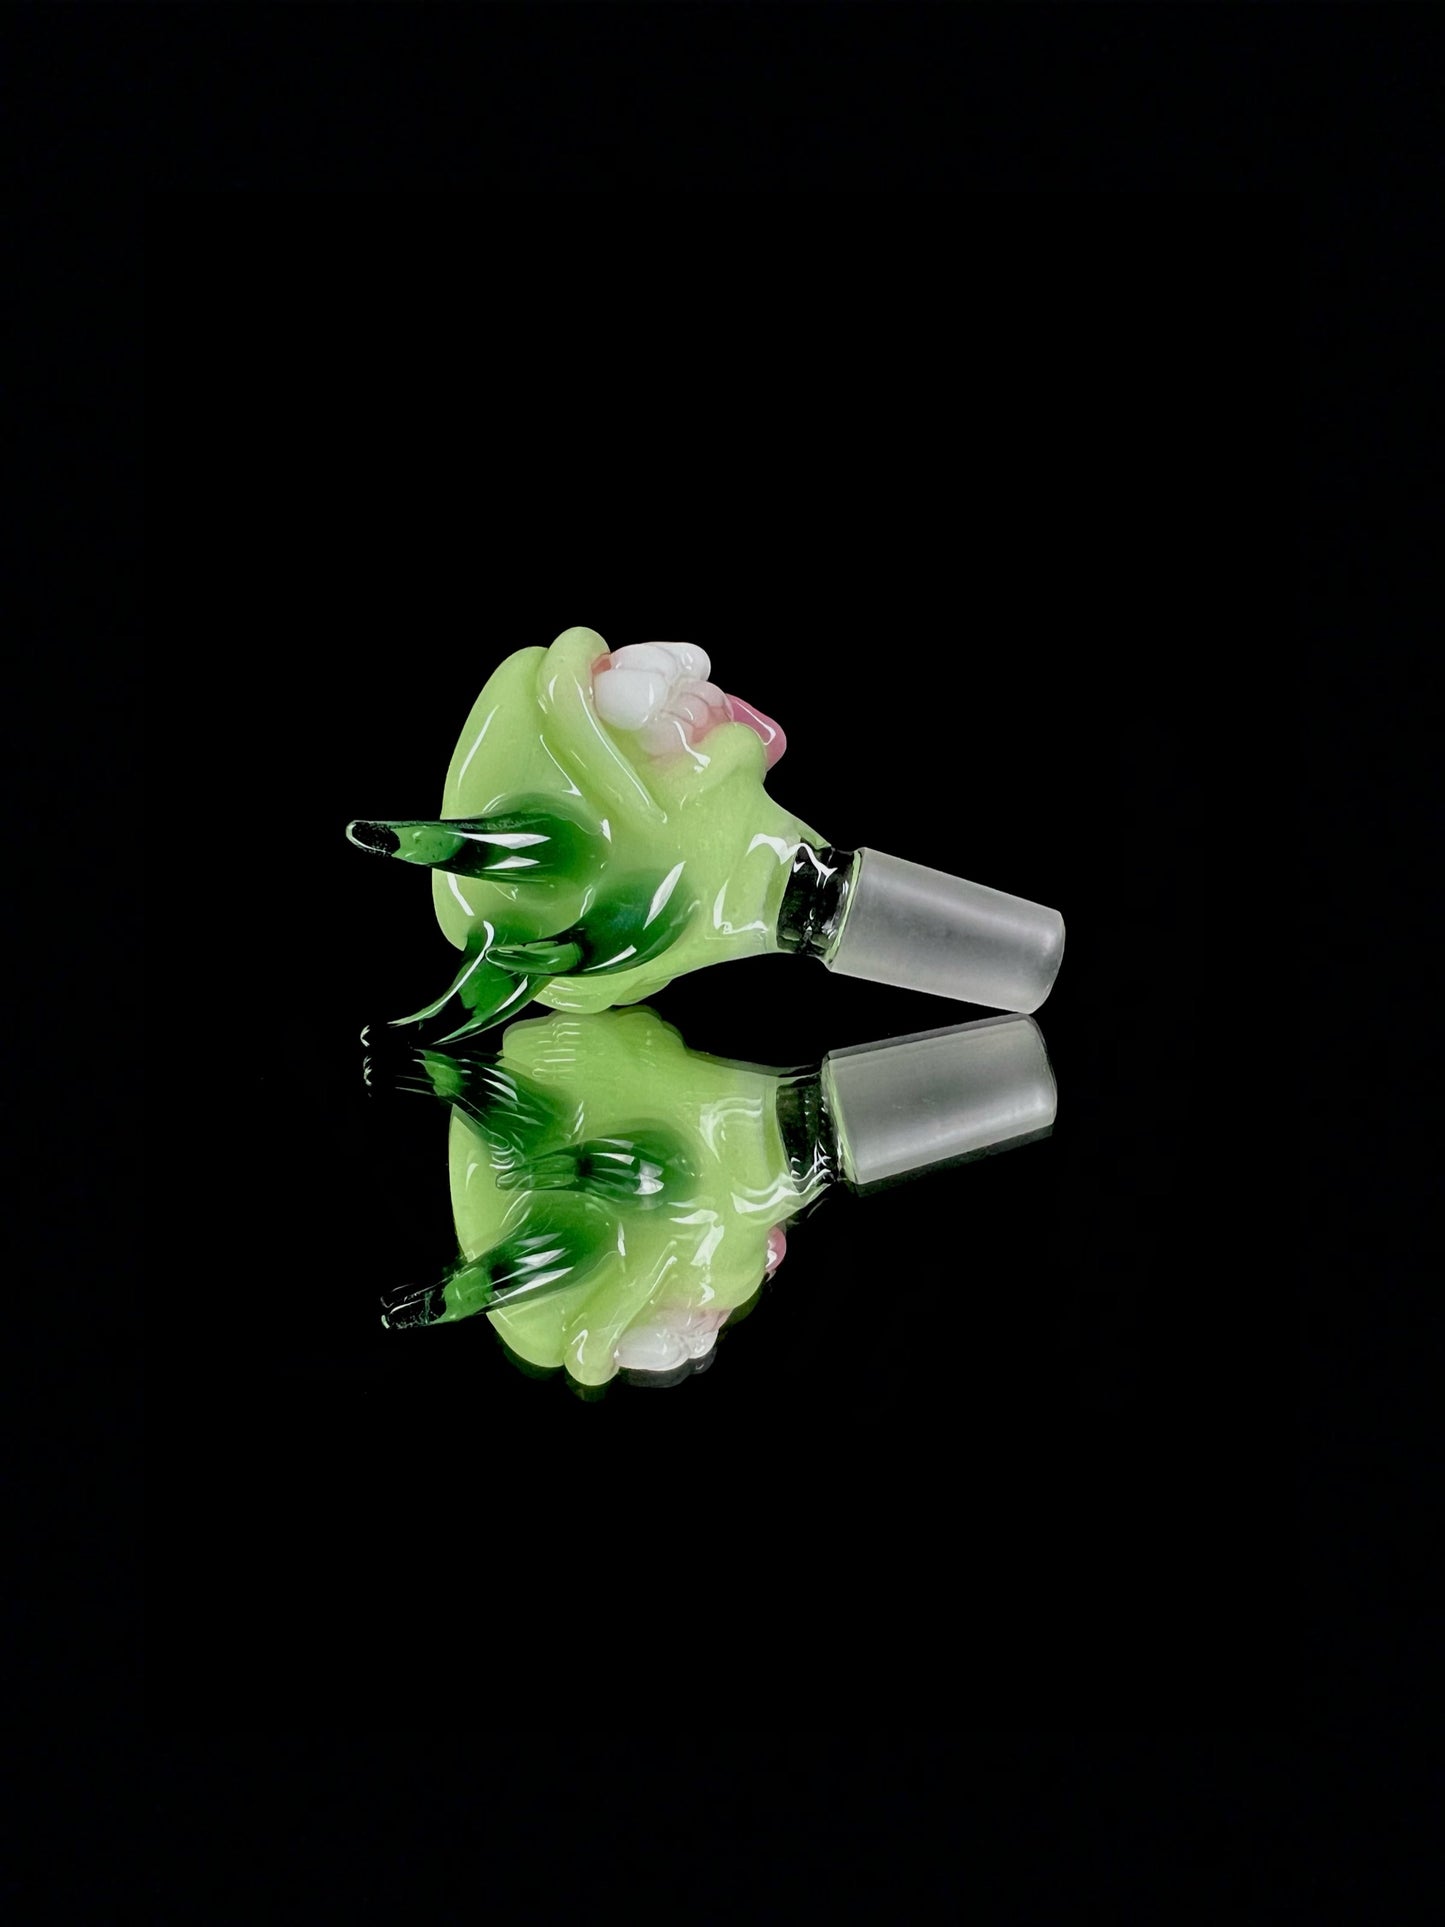 14mm pistachio cyclops slide by Leviathan Glass